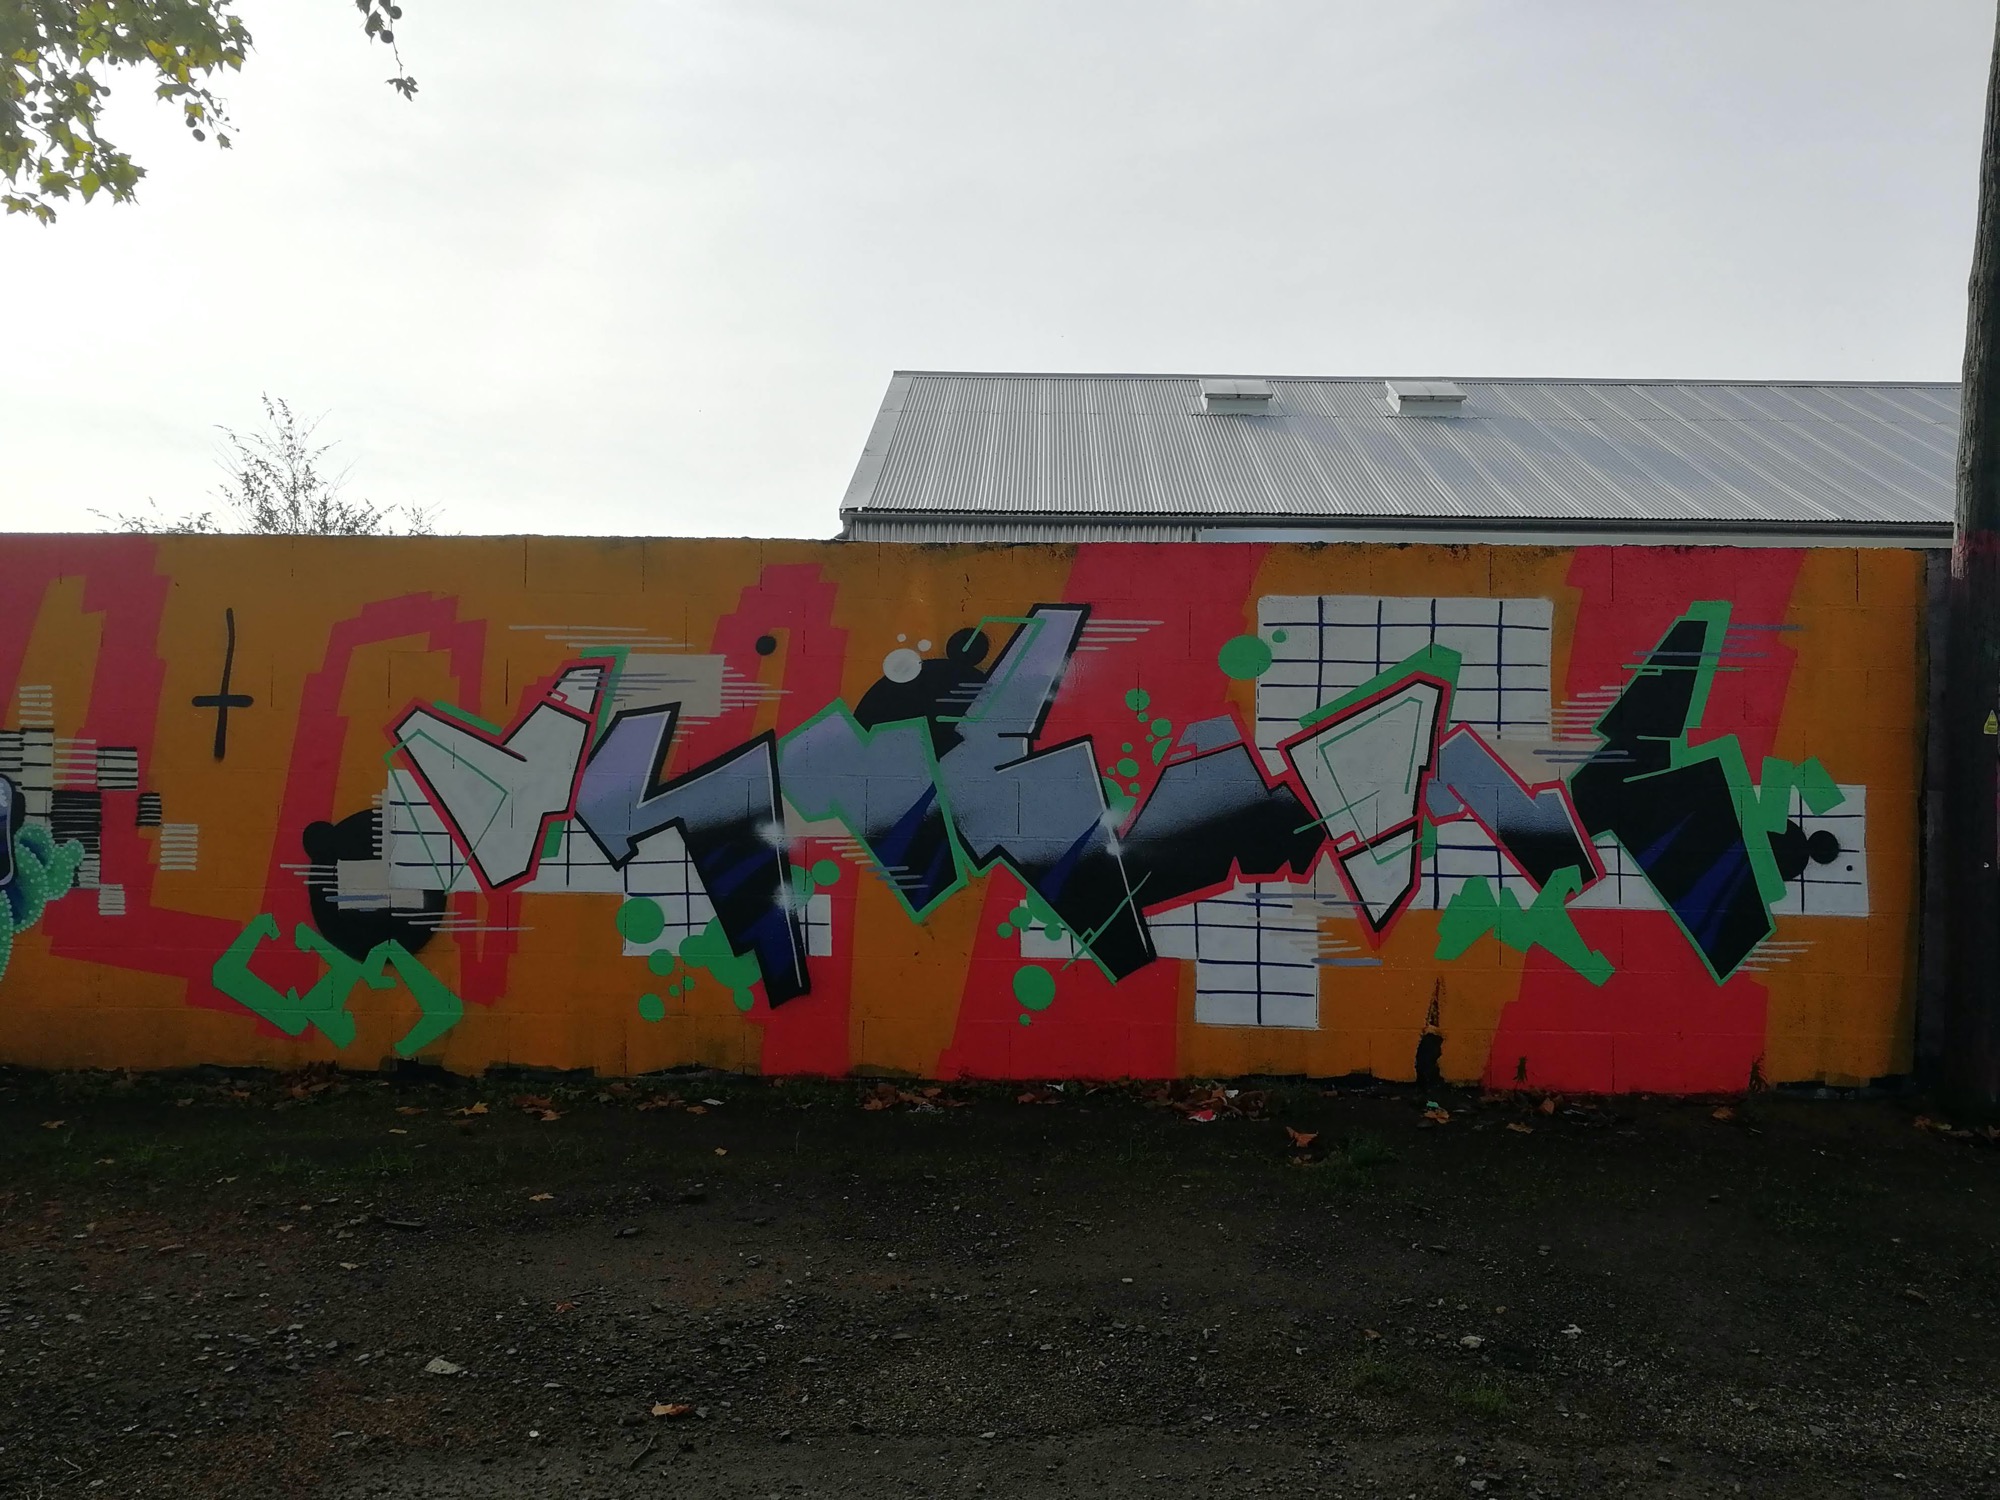 Graffiti 2994  captured by Rabot in Nantes France